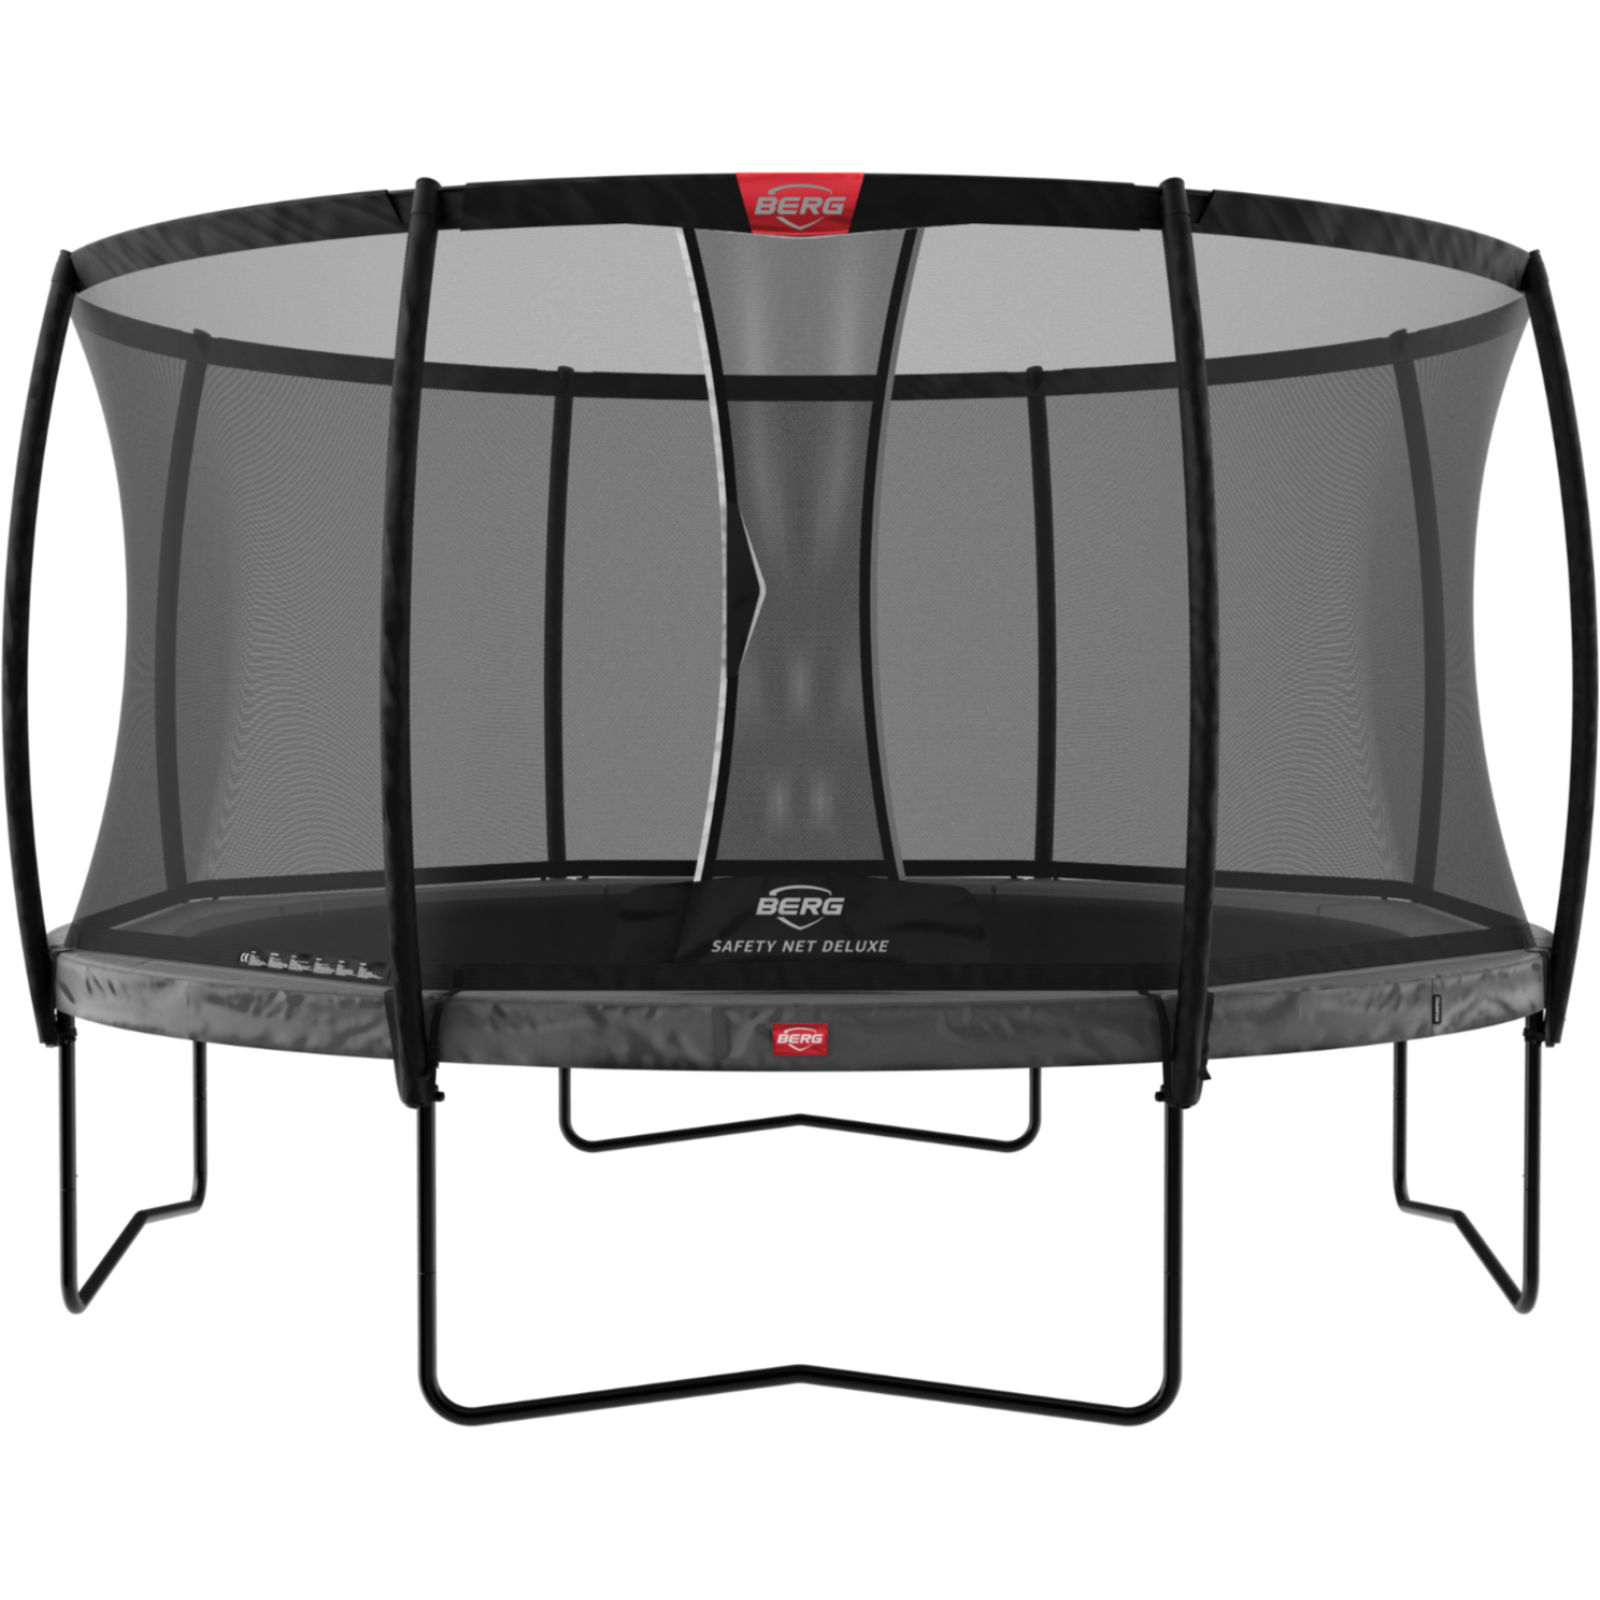 Berg Champion Grey incl. Safety Net Deluxe - Best quality, biggest choice